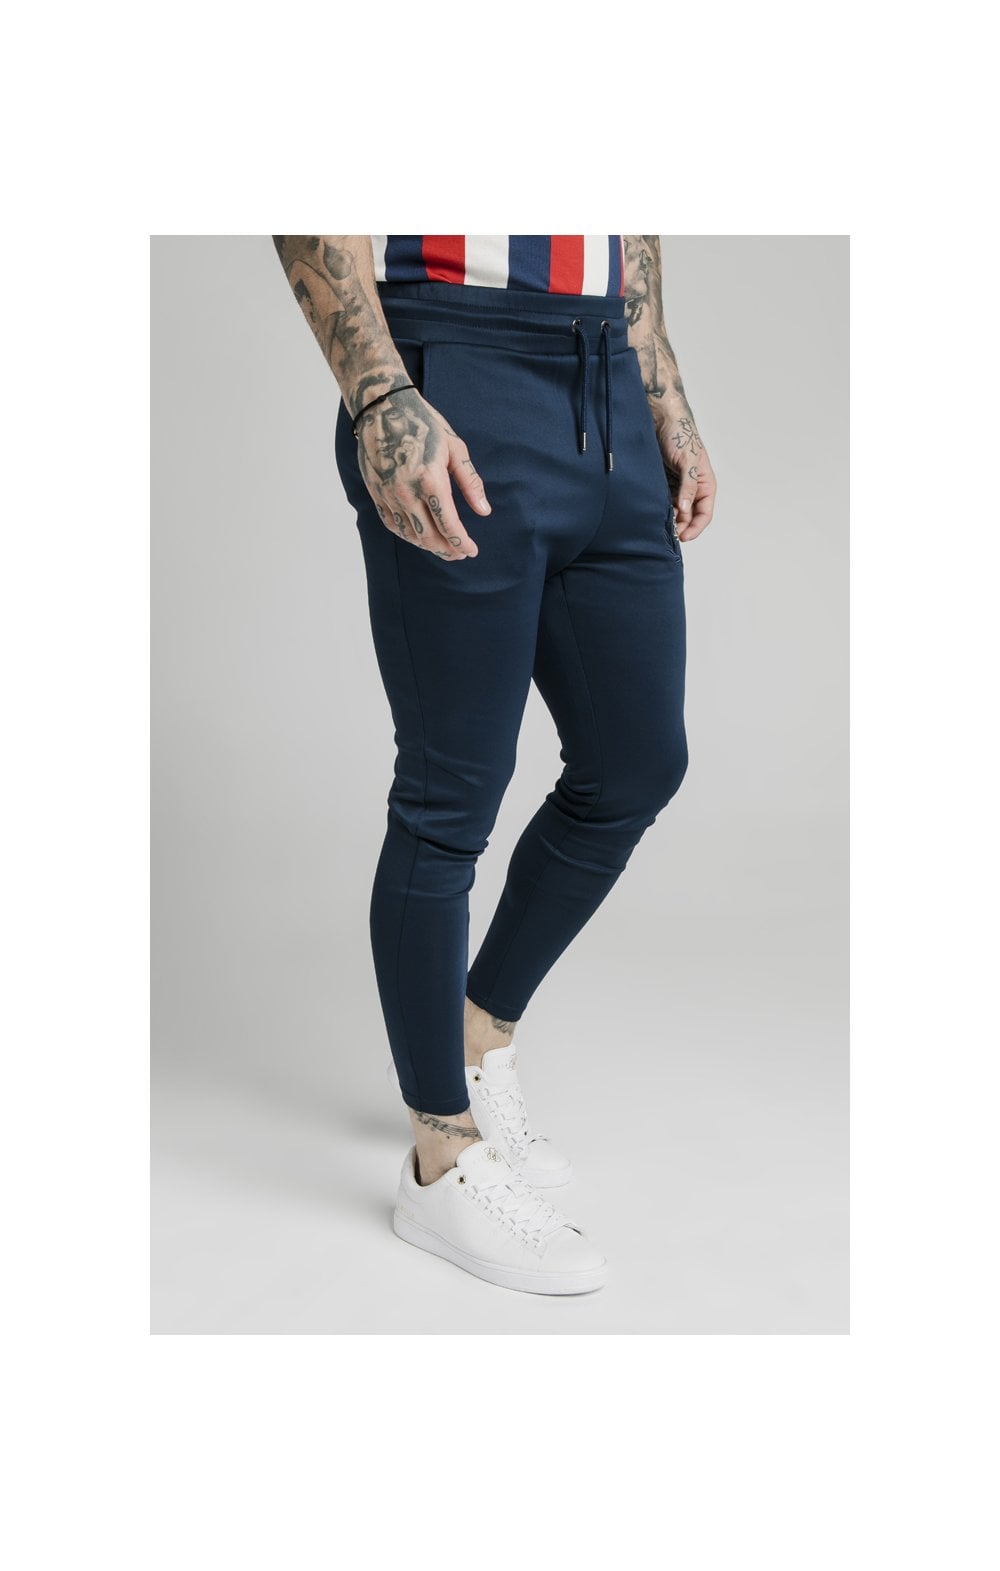 Load image into Gallery viewer, SikSilk Athlete Track Pants - Navy (2)